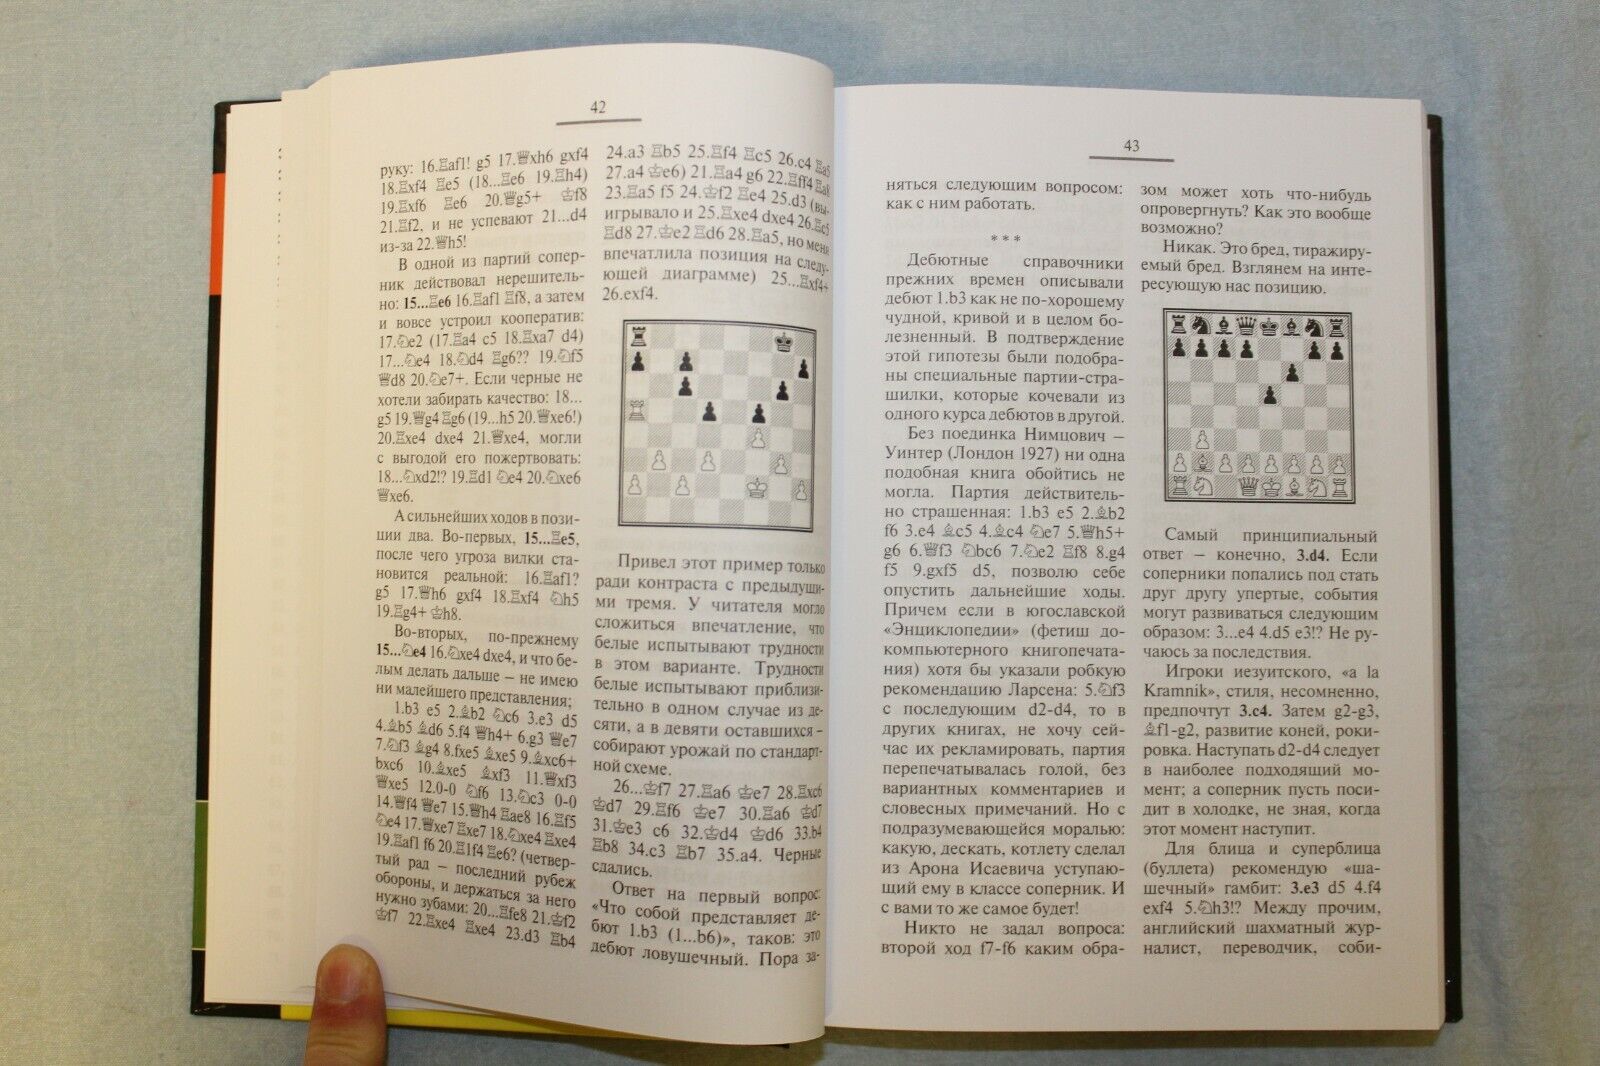 11535.Russian Chess Book: Odessky. Debut Winning. Questions of non-modern chess theory